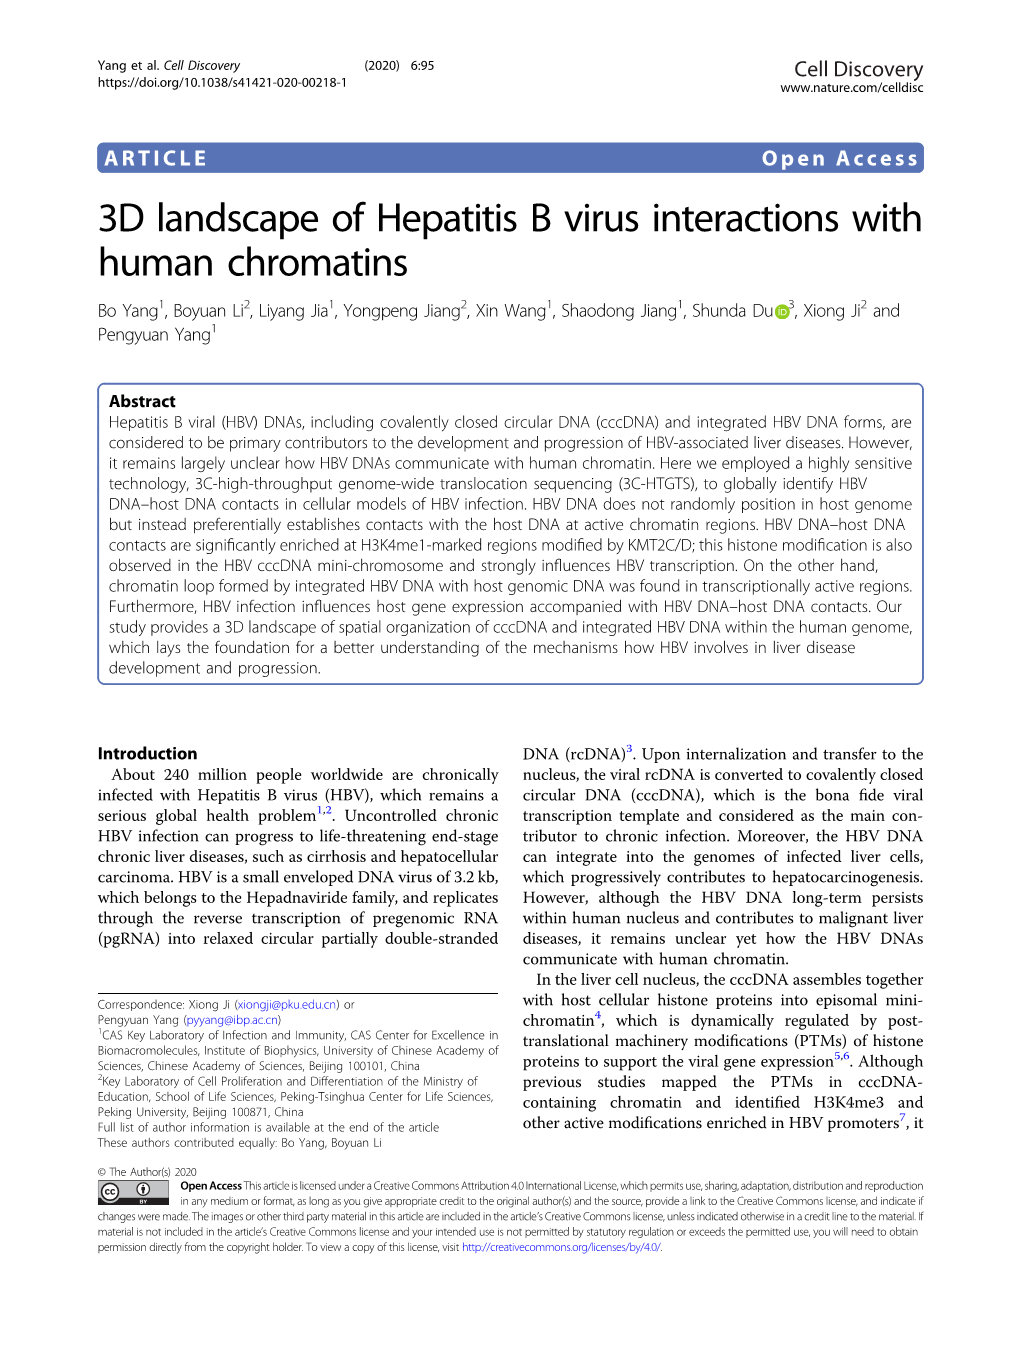 3D Landscape of Hepatitis B Virus Interactions with Human Chromatins